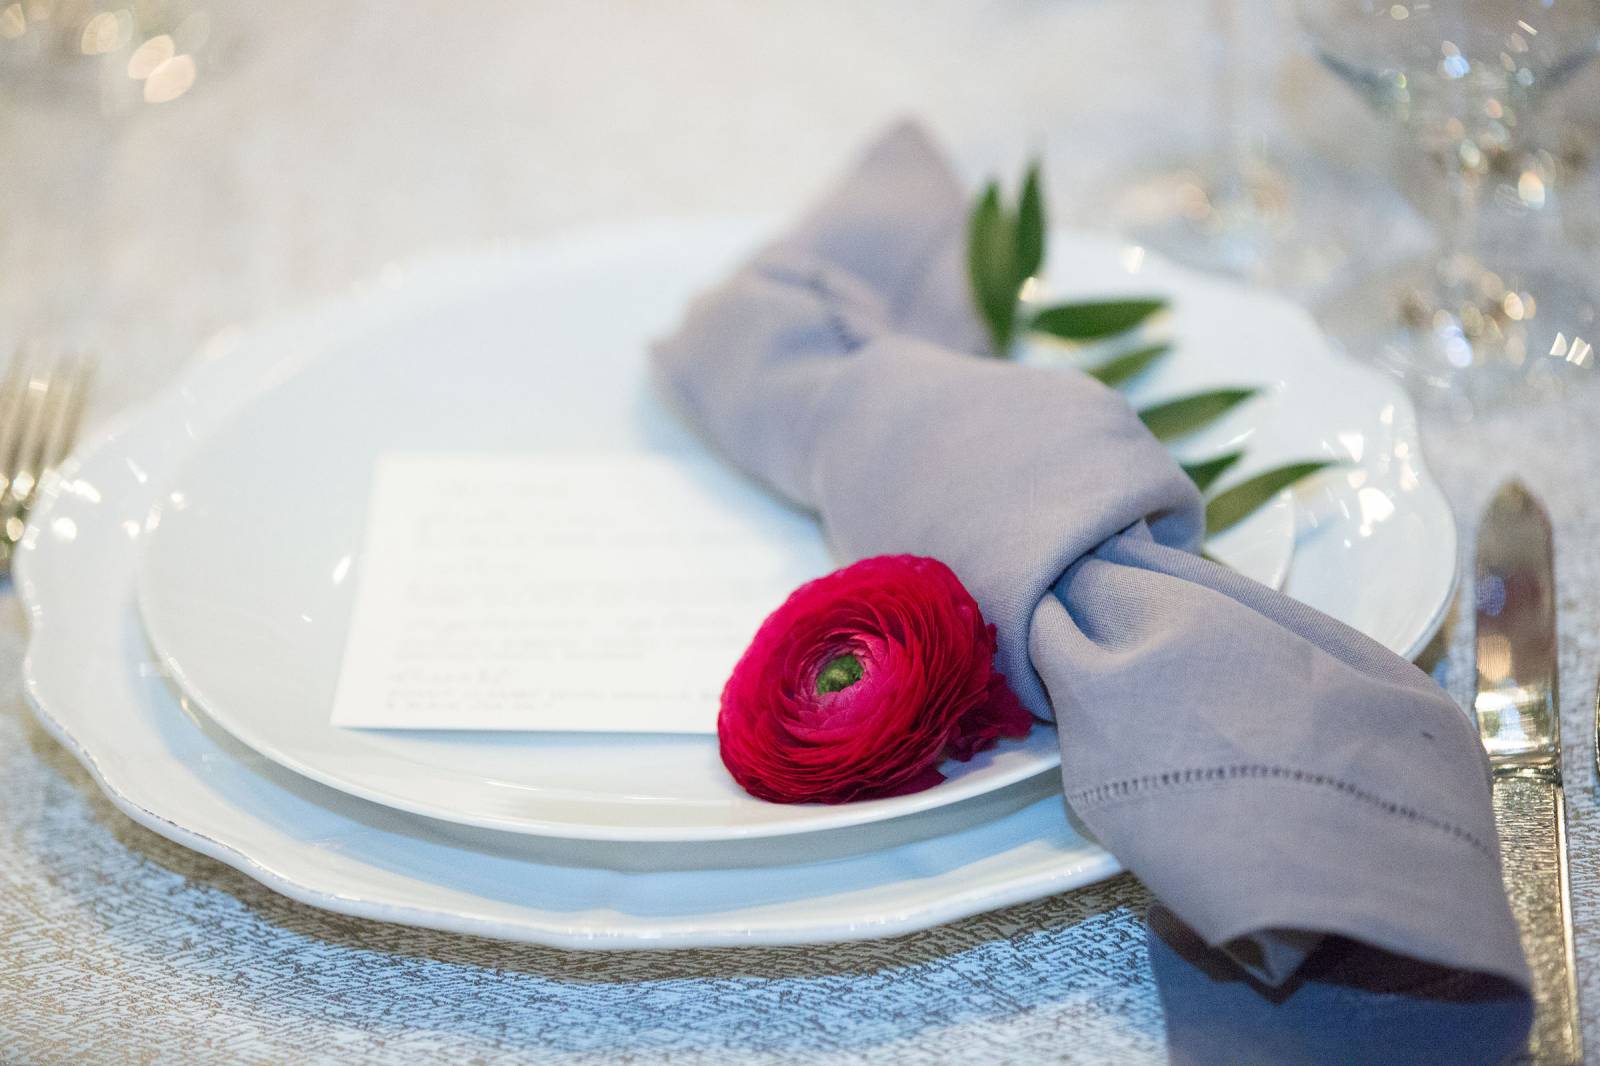 Place setting of white plates, gray napkin and red flower